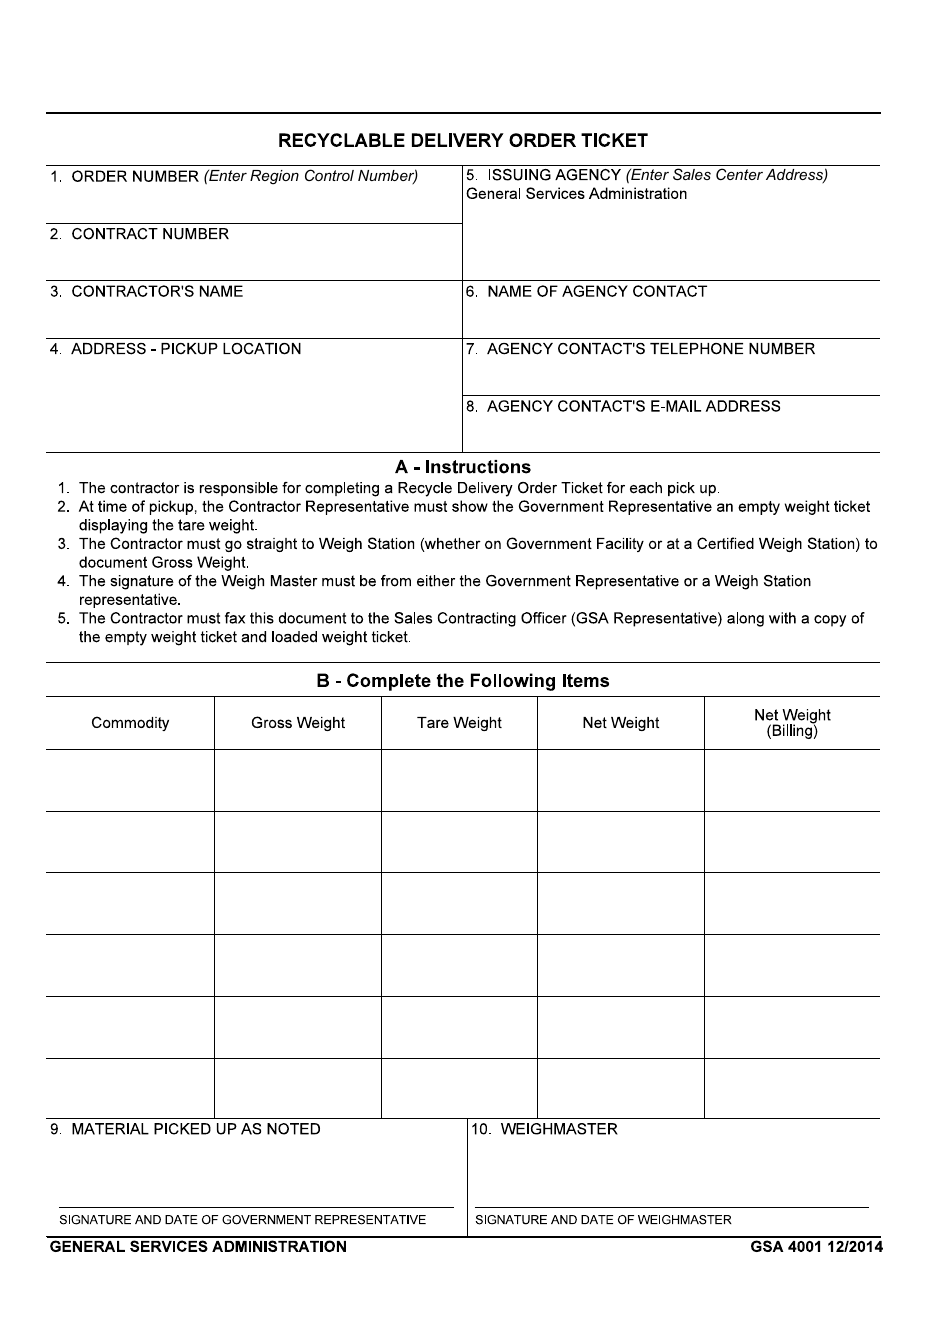 GSA Form 4001 Recyclable Delivery Order Ticket, Page 1